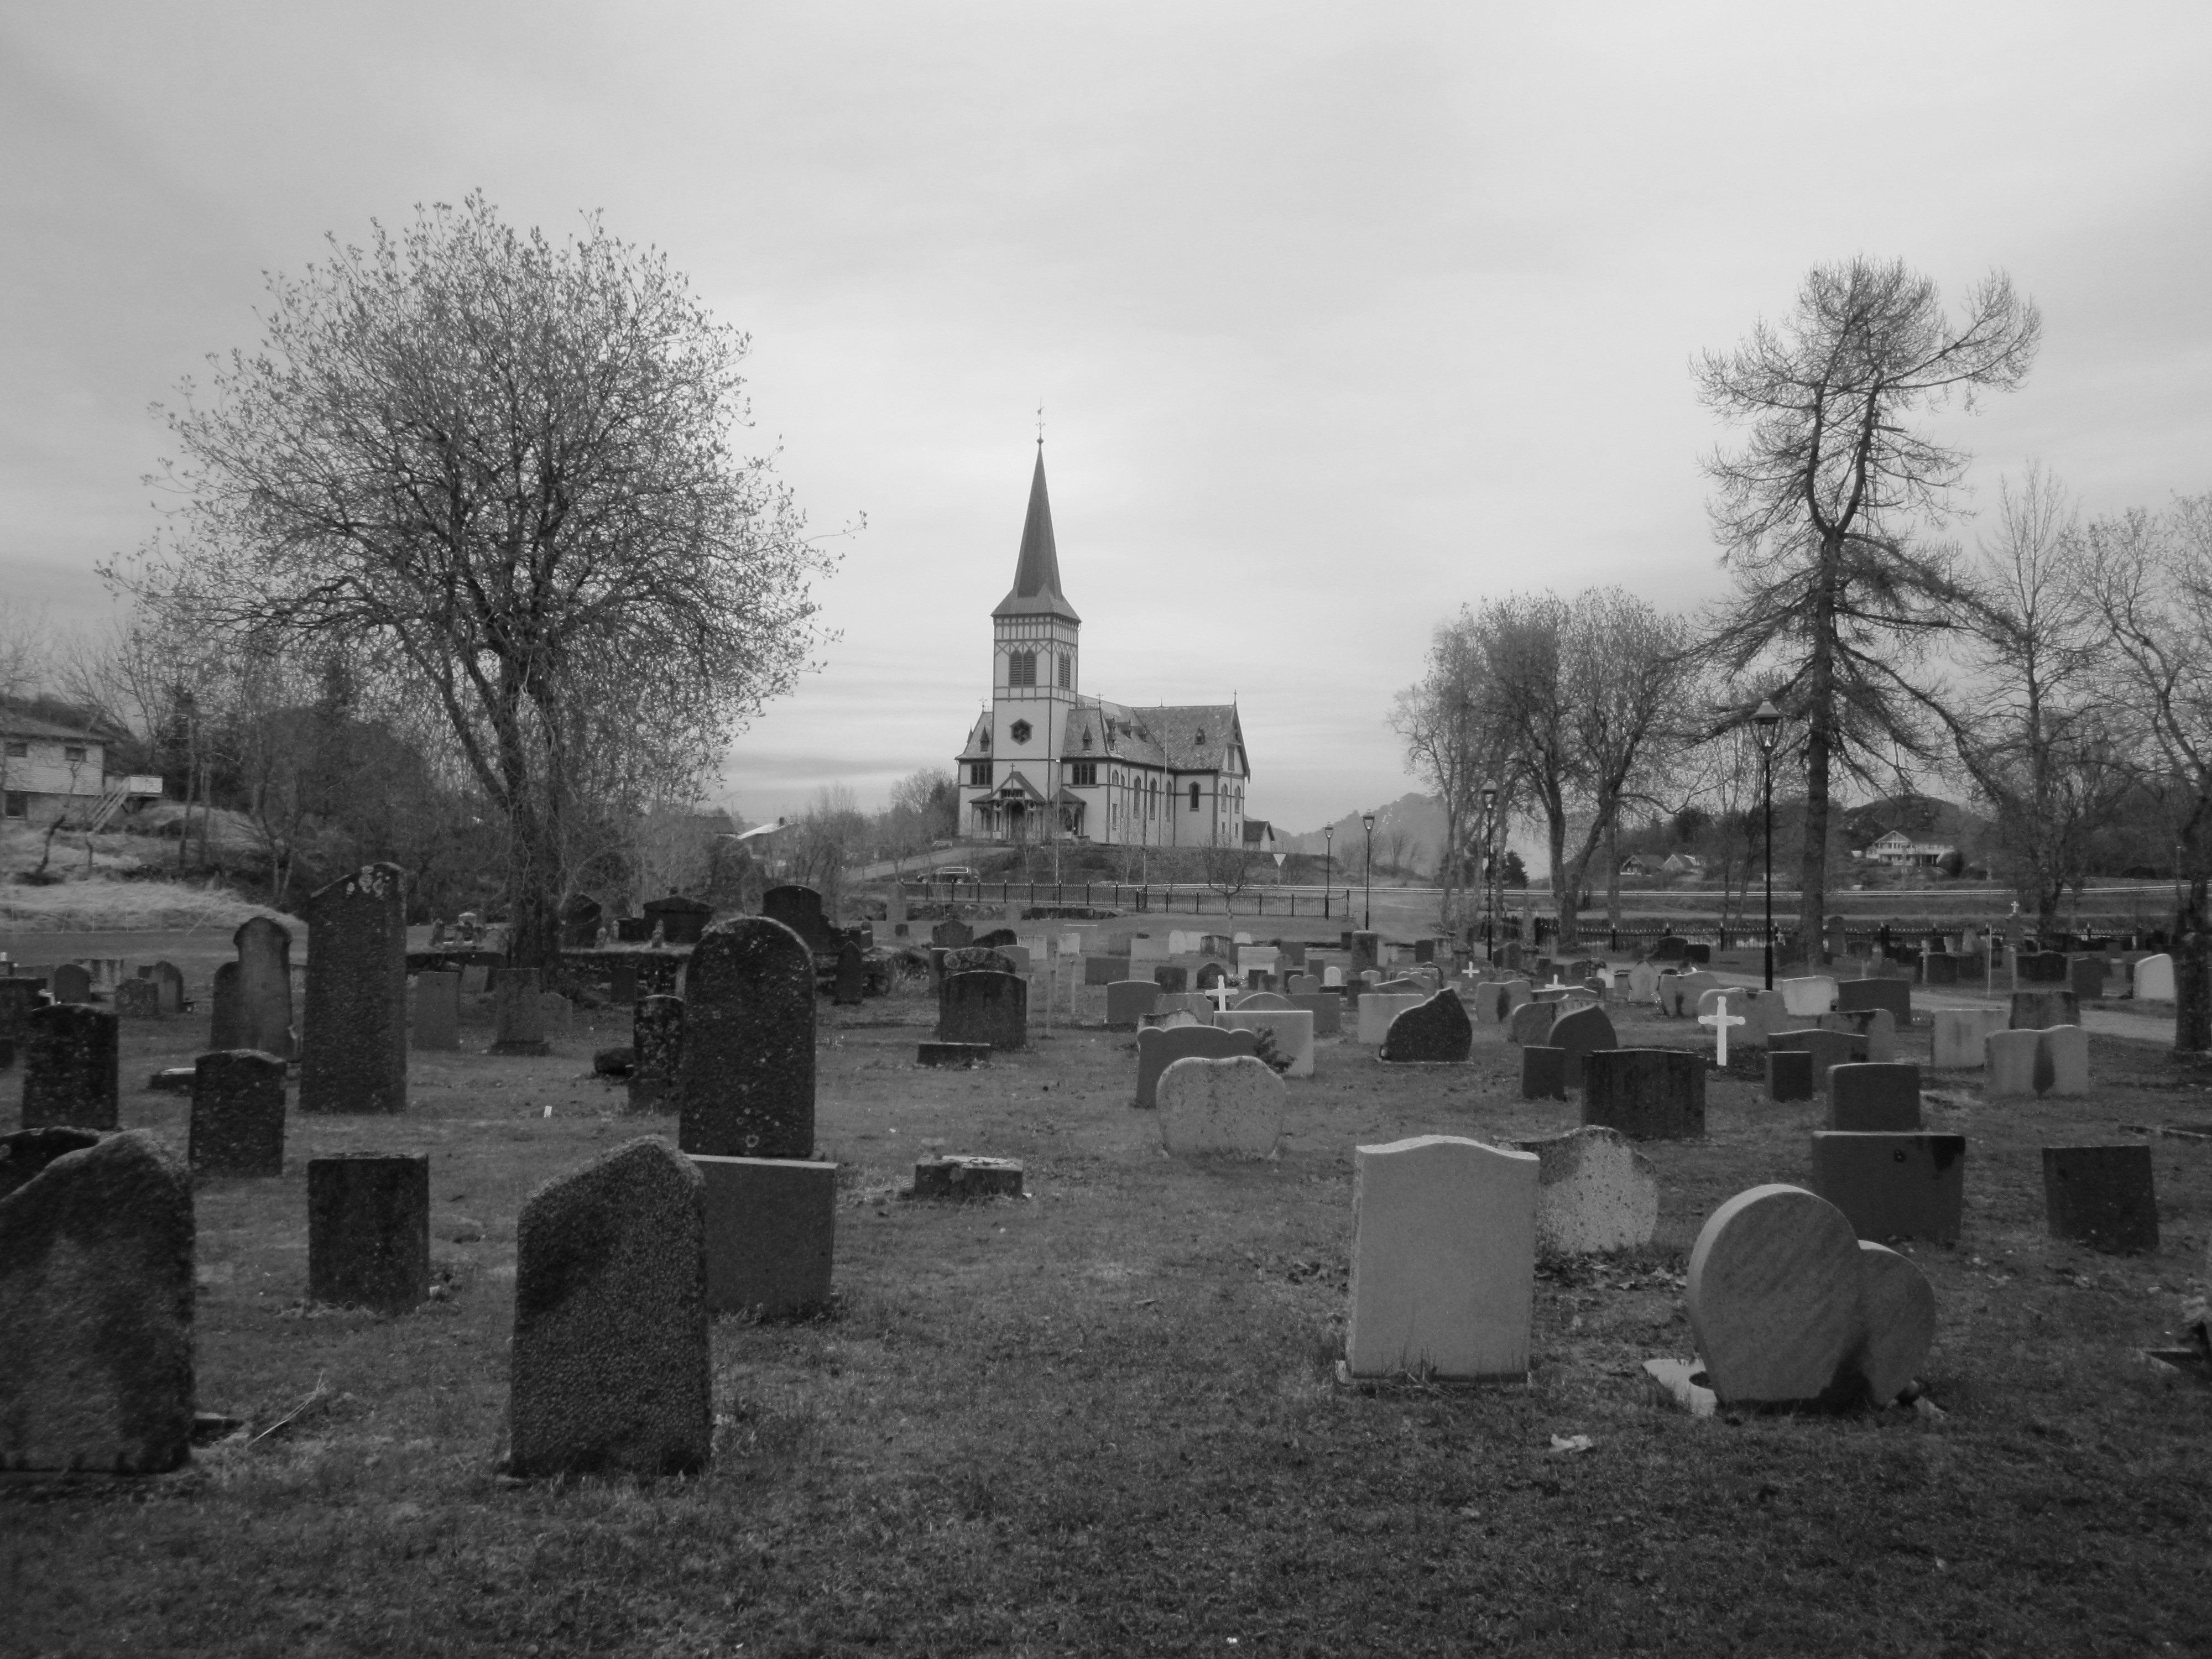 Cemetery 4k Ultra Hd Wallpaper - Church Cemetery Black And White , HD Wallpaper & Backgrounds